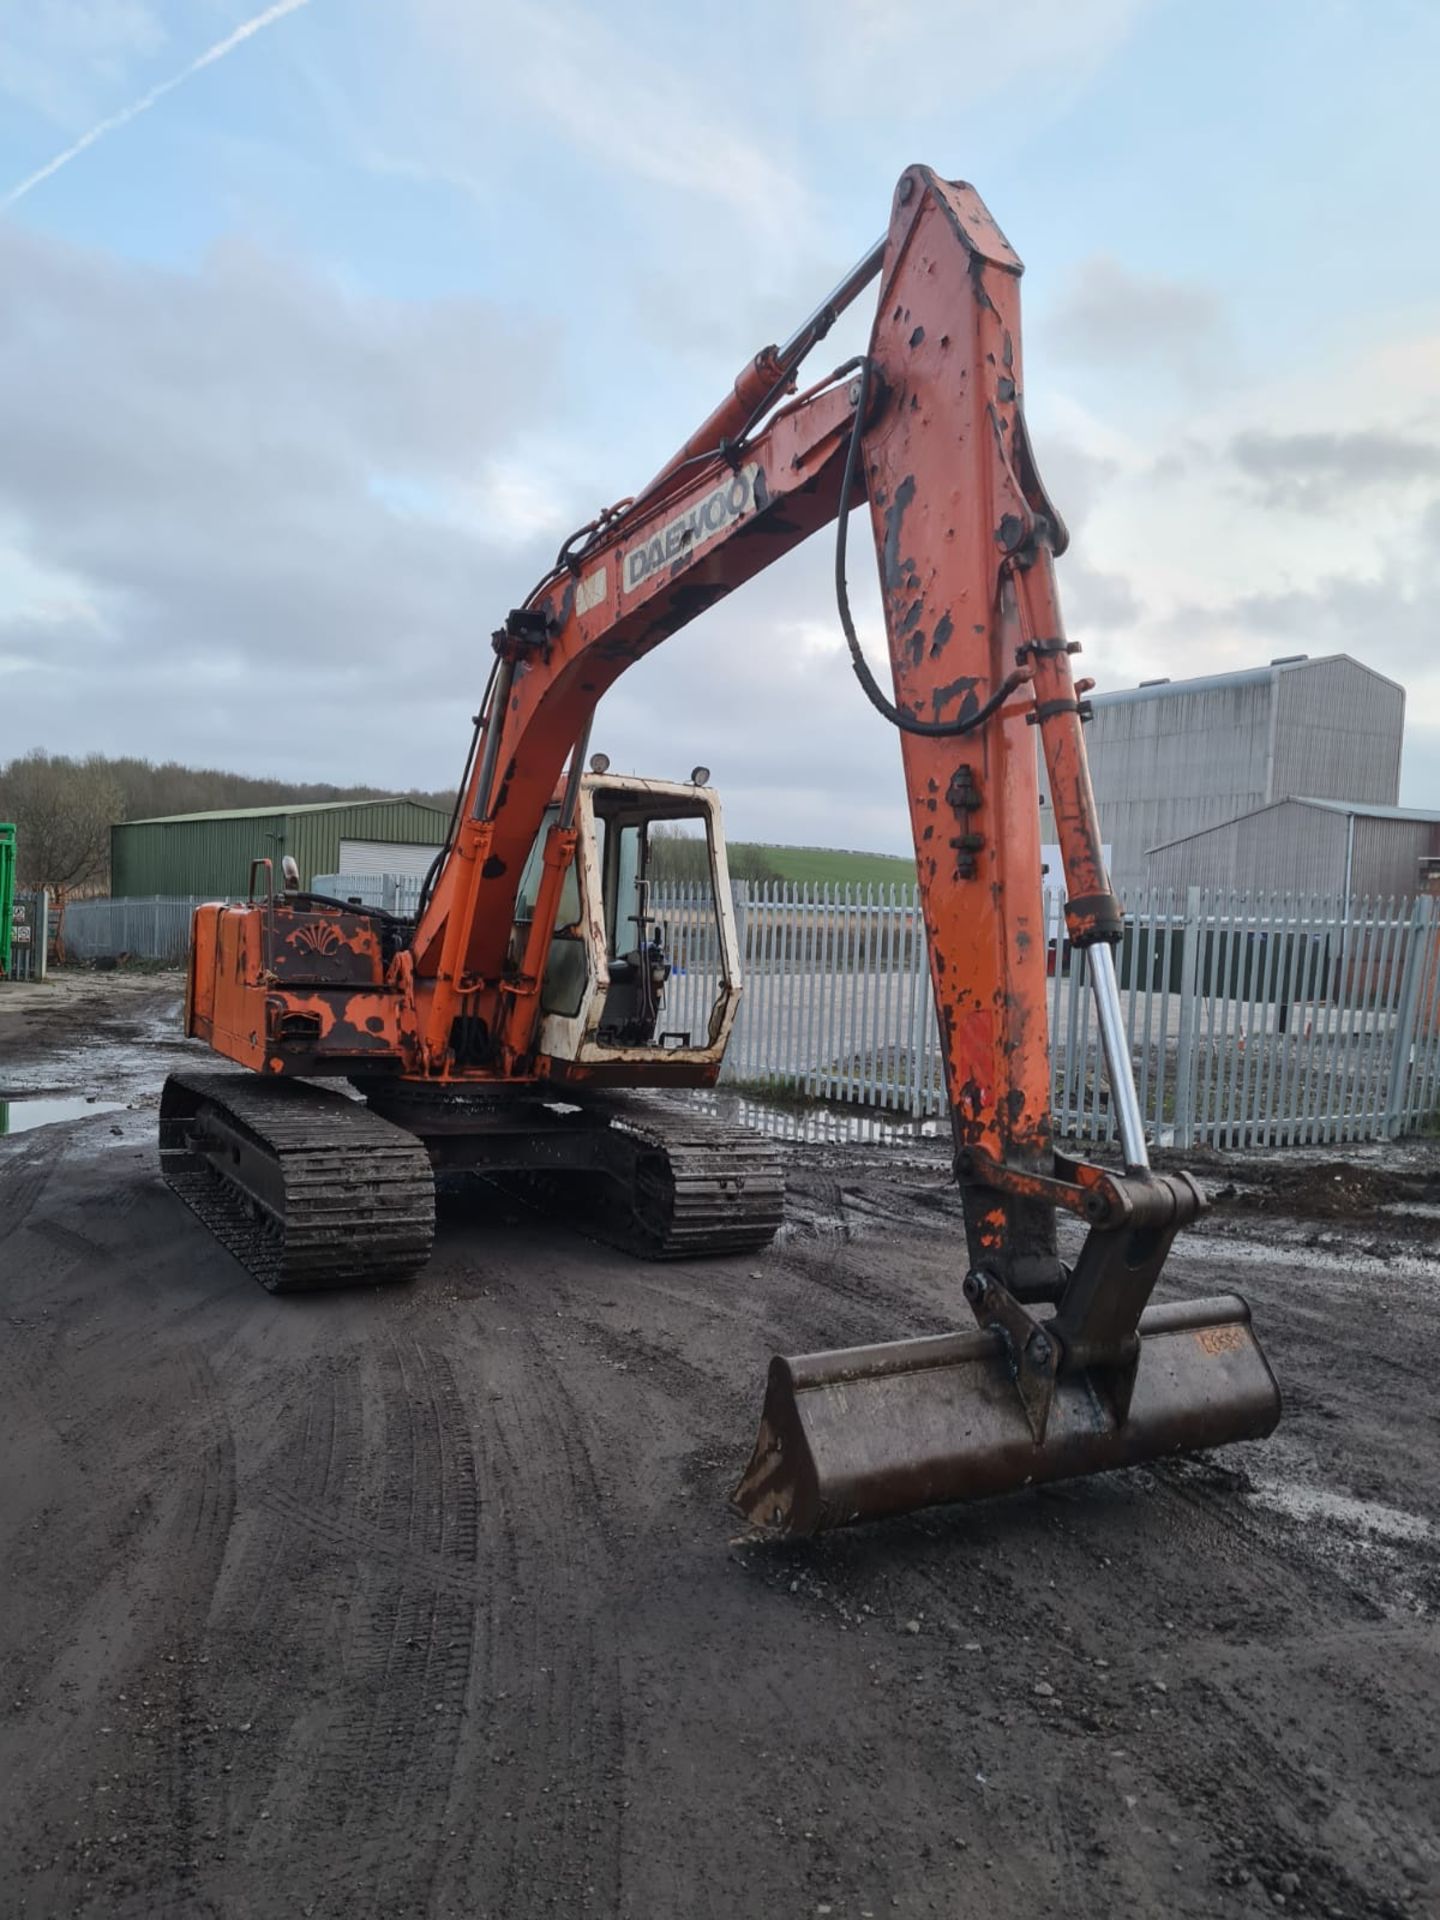 DAEWOO DH 13 TON STEEL TRACKED CRAWLER DIGGER / EXCAVATOR SIX CYLINDER ENGINE 6199 HOURS *NO VAT* - Image 5 of 12